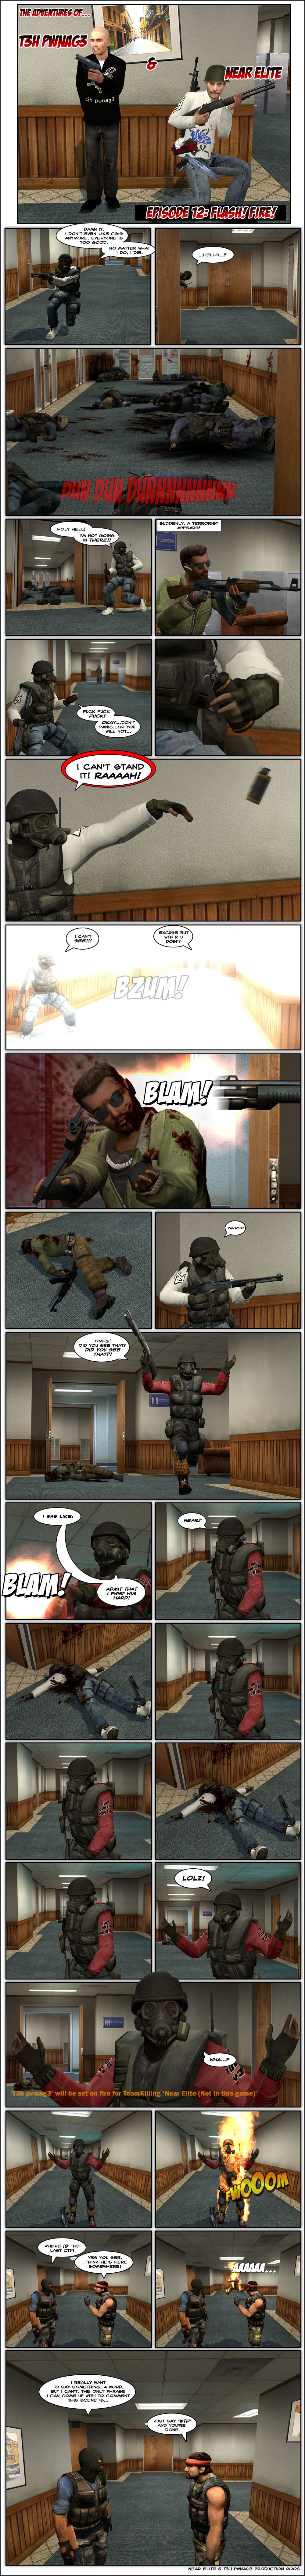 In Counter-Strike: Source, Near Elite, wearing an SAS uniform, scaredly sneaks through CS Office, noting he doesn’t even like CS:S anymore, everyone is too good and no matter what he does, he dies. He peeks through a door and asks hello. Beyond the door are a bunch of counter-terrorist corpses. Near exclaims holy hell, he’s not going in there. Suddenly, a terrorist appears on the other end of the room Near is in. Near Elite says fuck, fuck, fuck, then tells himself to not panic or he won’t survive. He grabs a flashbang and screams he can’t stand it, then throws the flashbang towards the terrorist. It goes off, blinding Near Elite himself. The terrorist asks him in leet-speak excuse me, what the fuck are you doing. Suddenly, someone shoots the terrorist through the head with a shotgun. Near asks if it’s Pwnag3. T3h Pwnag3 then appears, also wearing an SAS uniform, and says oh my fucking God, did you see that, did you see that. Pwnag3 says he was like blam as he exemplifies by shooting his gun, then tells Near to admit that he pwned him hard. Pwnag3 then calls Near’s name and realizes he just accidentally shot Near dead. A moment passes, then Pwnag3 says lolz. He then asks wha as a message says he will be set on fire for teamkilling Near Elite. Pwnag3 randomly bursts into flames. Meanwhile, a terrorist asks another where is the last counter-terrorist and the other replies he thinks he’s there somewhere. Pwnag3 then suddenly runs past them on fire and screaming. One of the terrorists notes he really wants to say something, a word, but he can’t, the only phrase he can come up with to comment this scene is. The other terrorist interrupts him, telling him just say WTF and you’re done. The end.